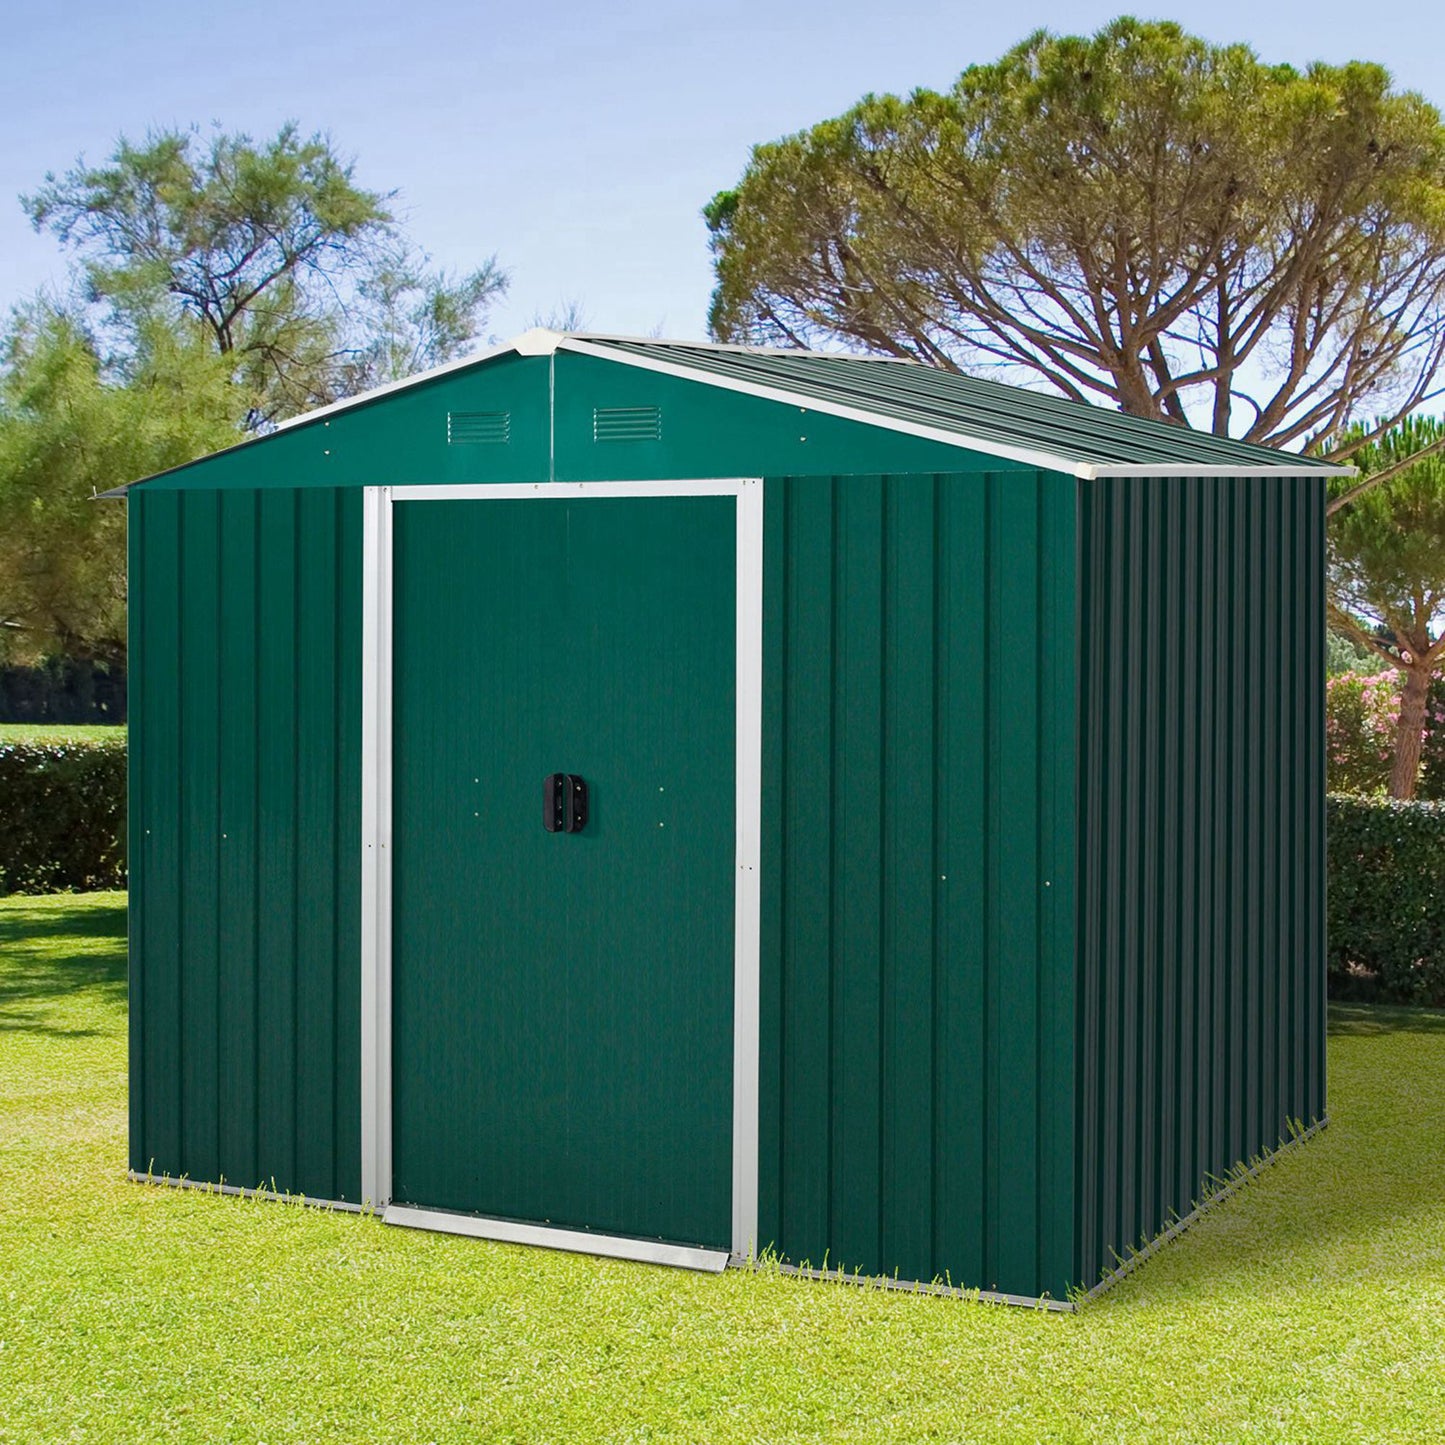 Outsunny 5.7 x 7.7ft Corrugated Steel Sliding Door Garden Shed - Green